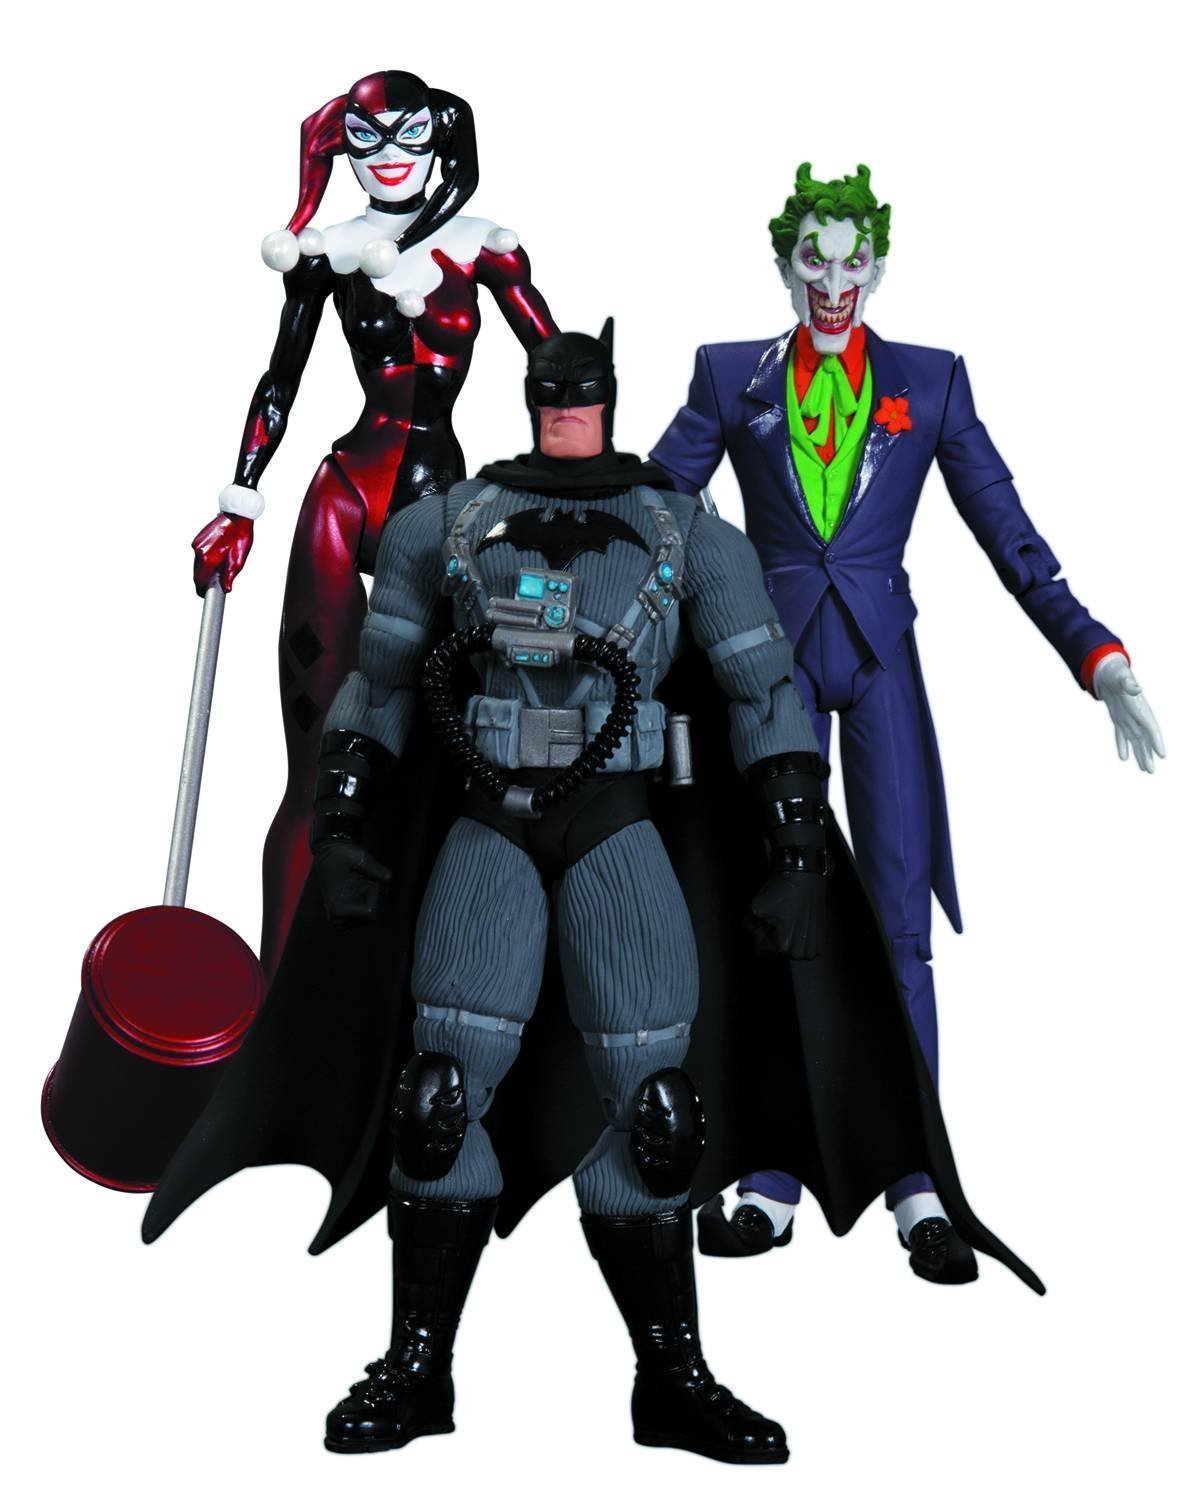 DC Collectibles Hush The Joker, Harley Quinn and Stealth Batman Action Figure Playset, 3-Pack - Nerd Arena